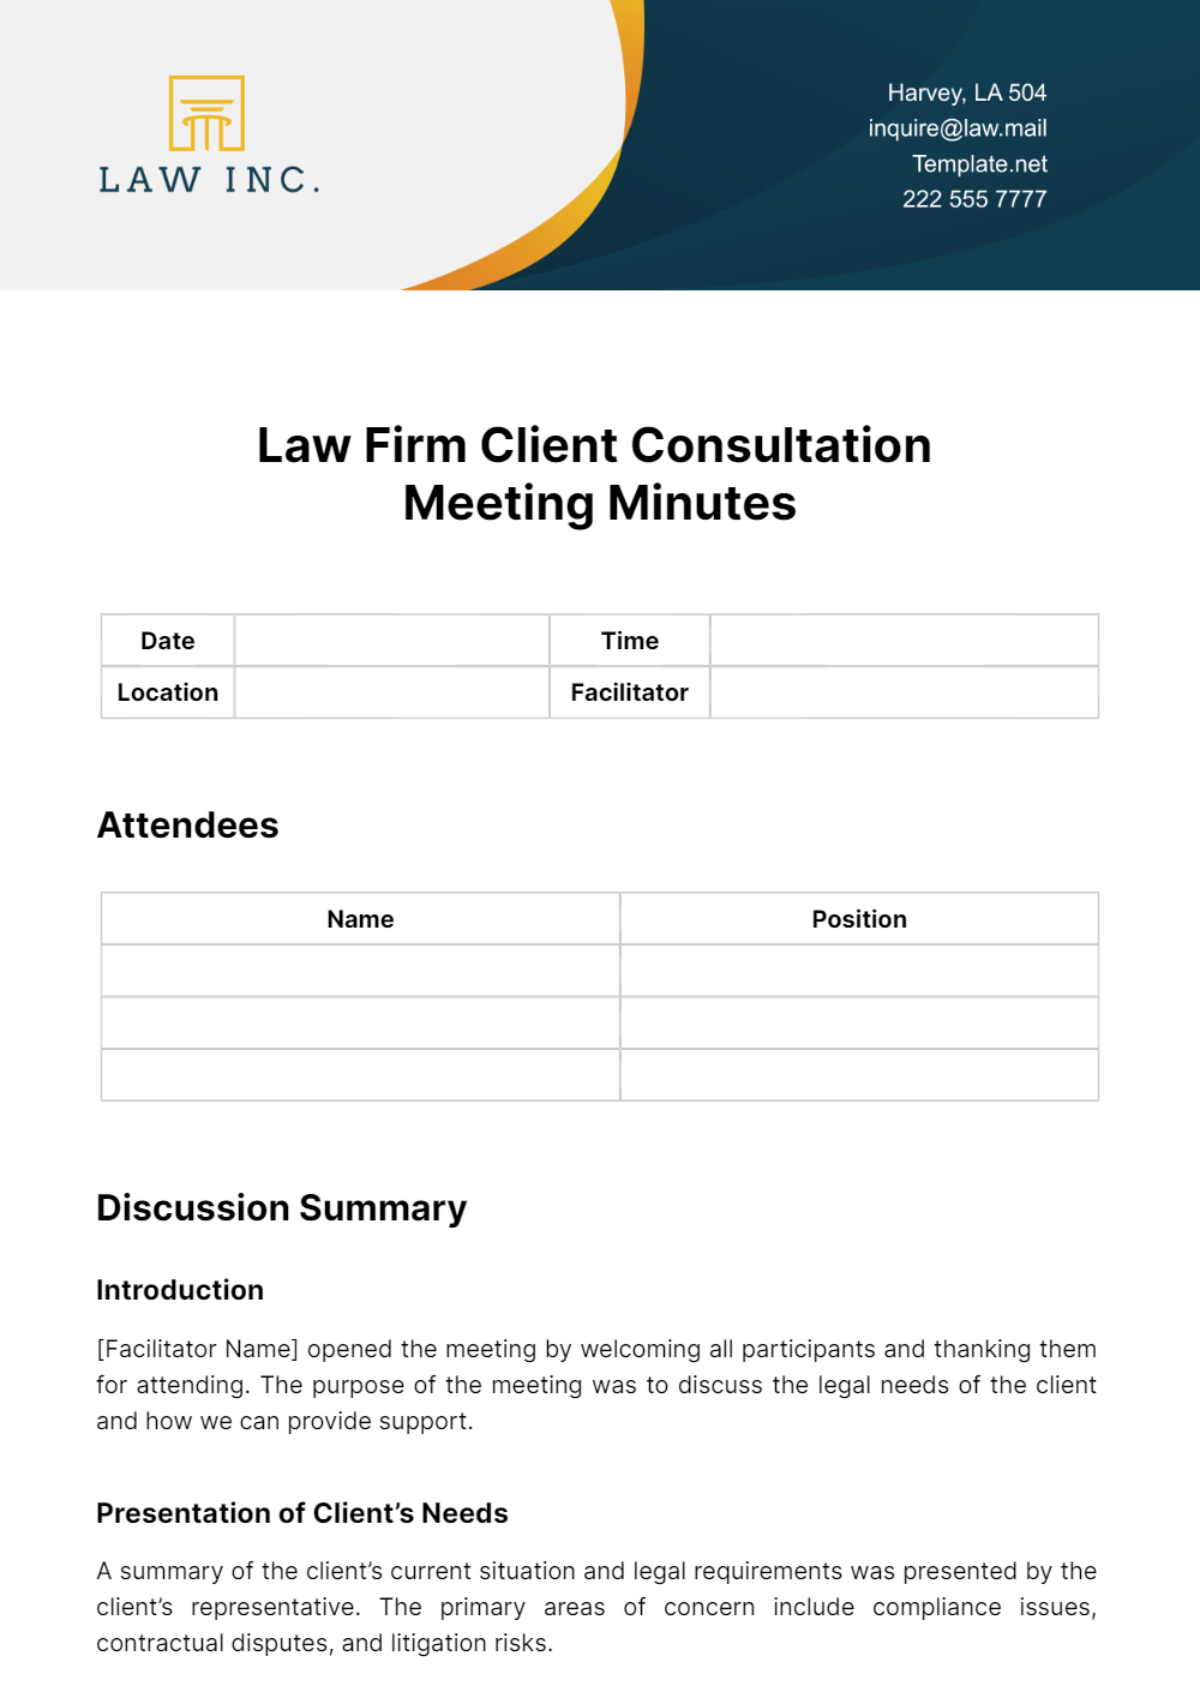 Law Firm Client Consultation Meeting Minutes Template